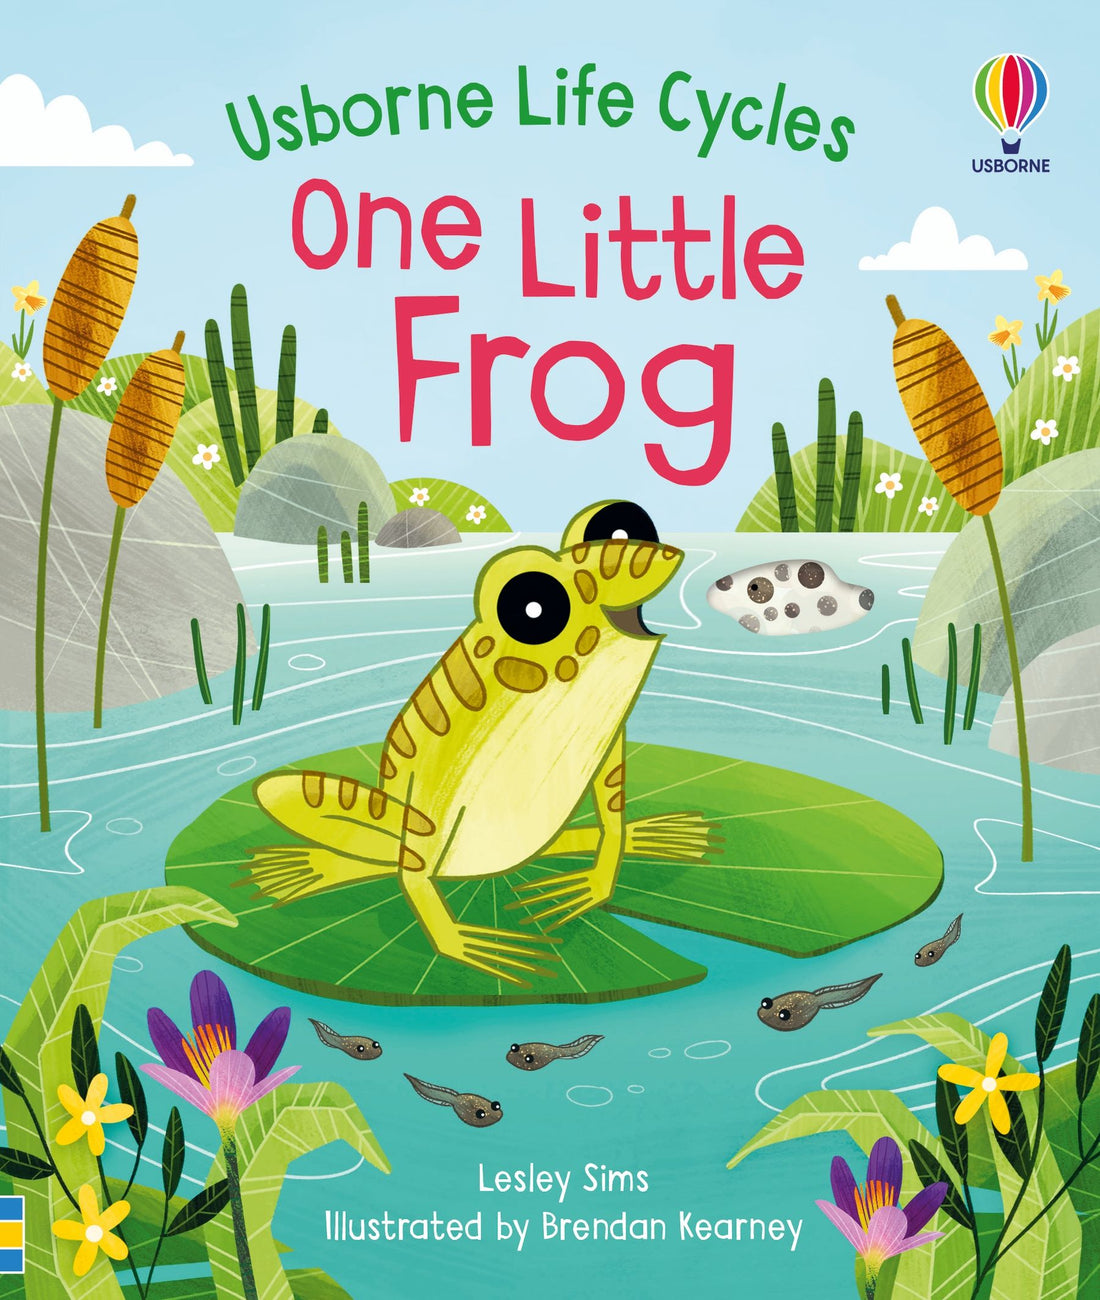 One Little Frog (Usborne Life Cycles)